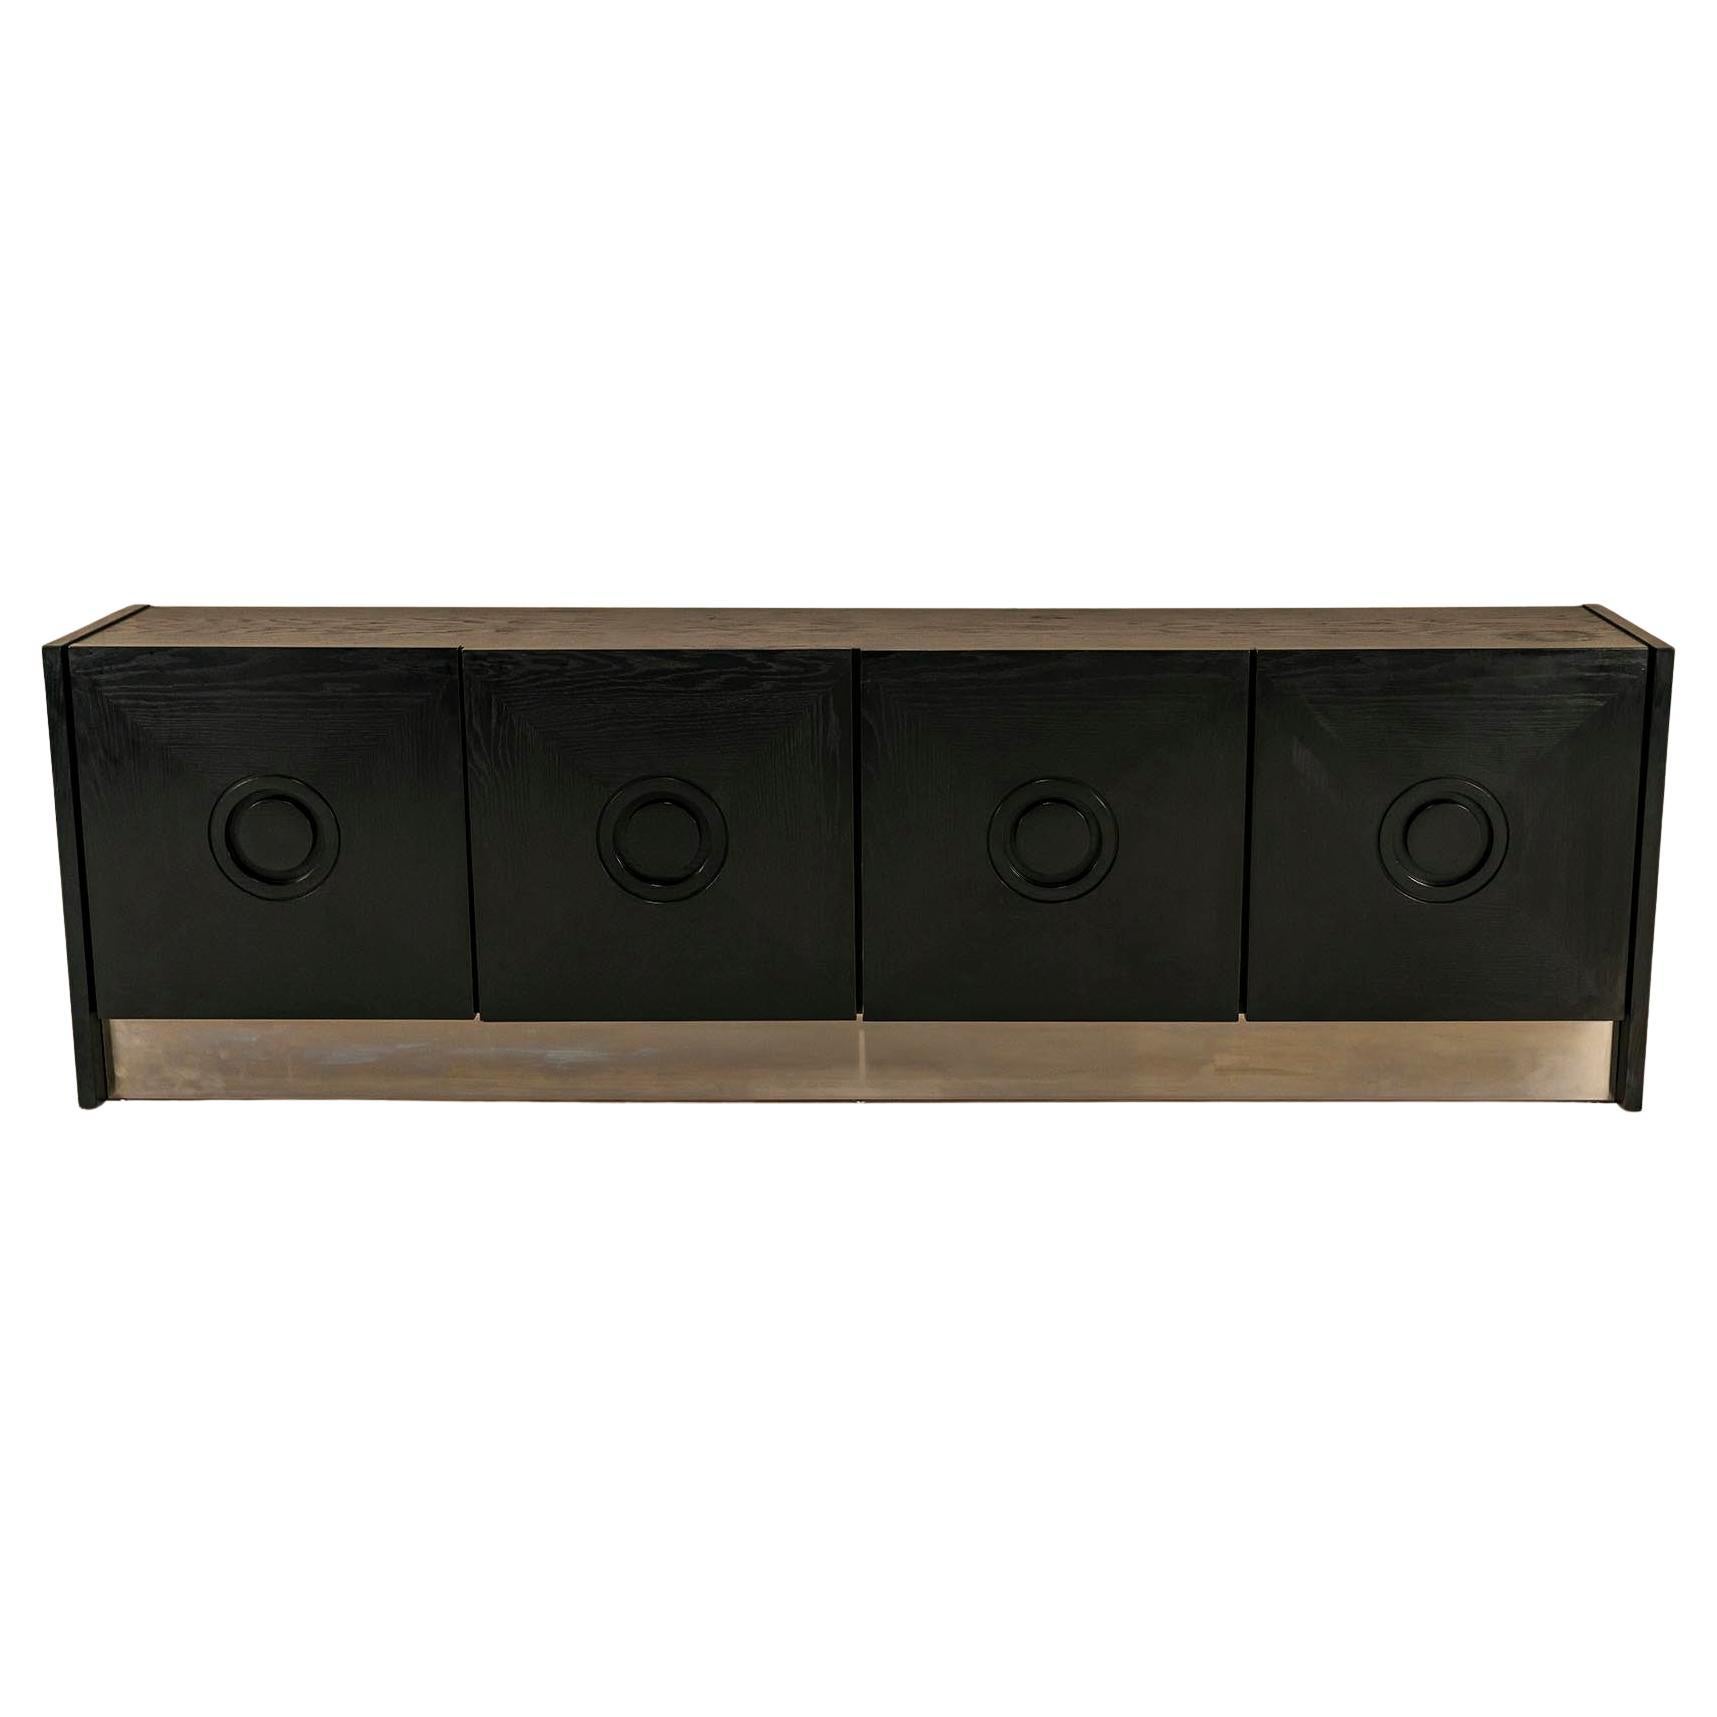 Brutalist Sideboard In Black Stained Oak And Brushed Steel, Belgium 1970s. For Sale